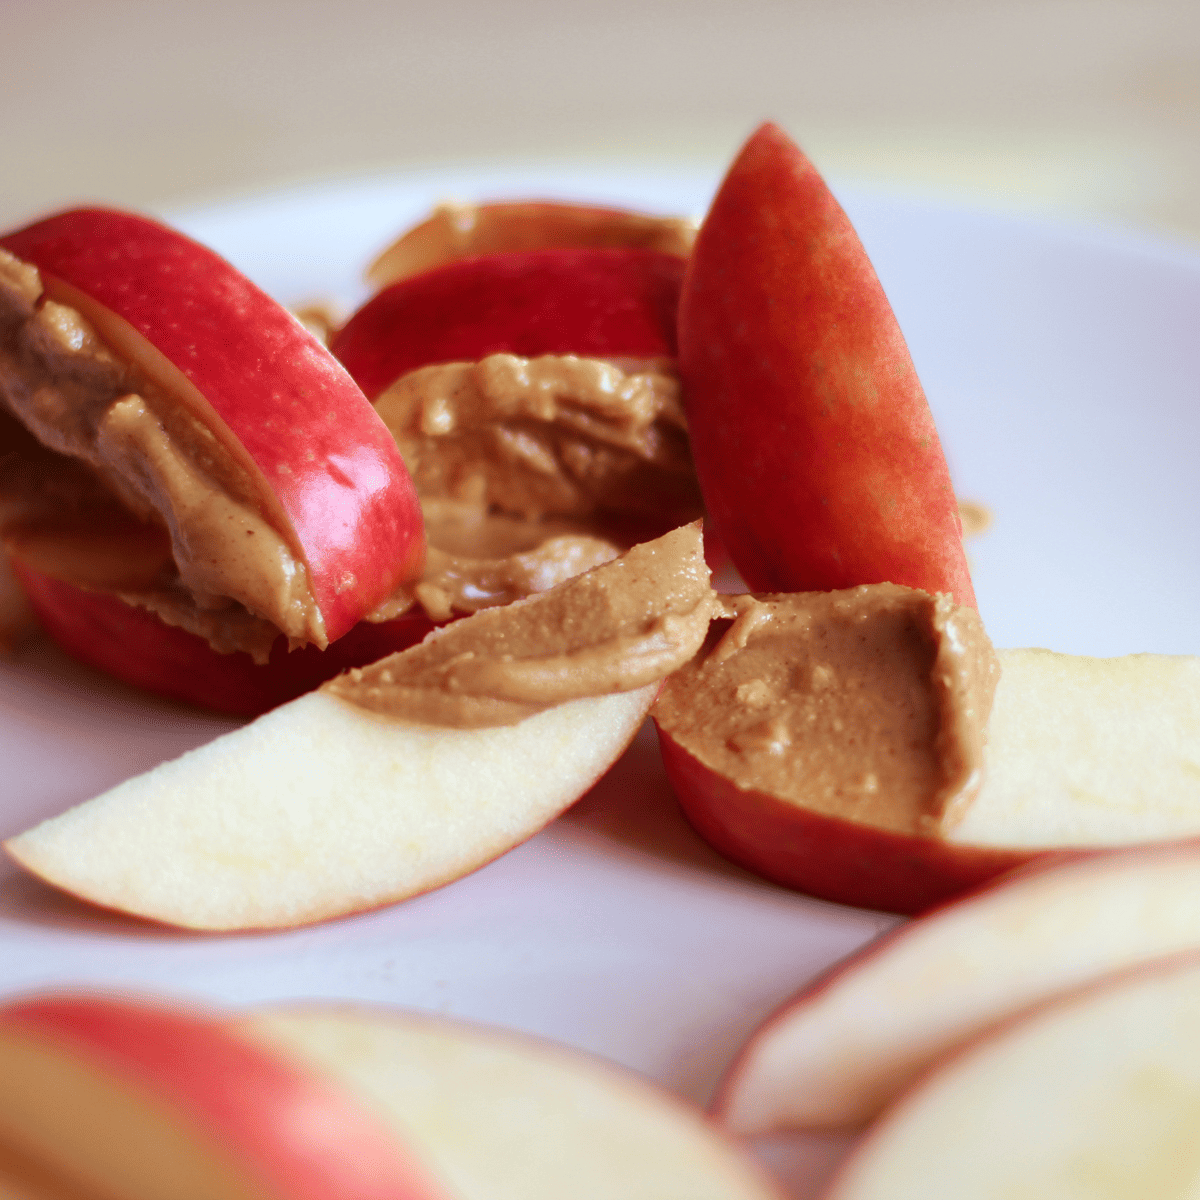 apples and peanut butter as a healthy snack for toddlers and picky eaters